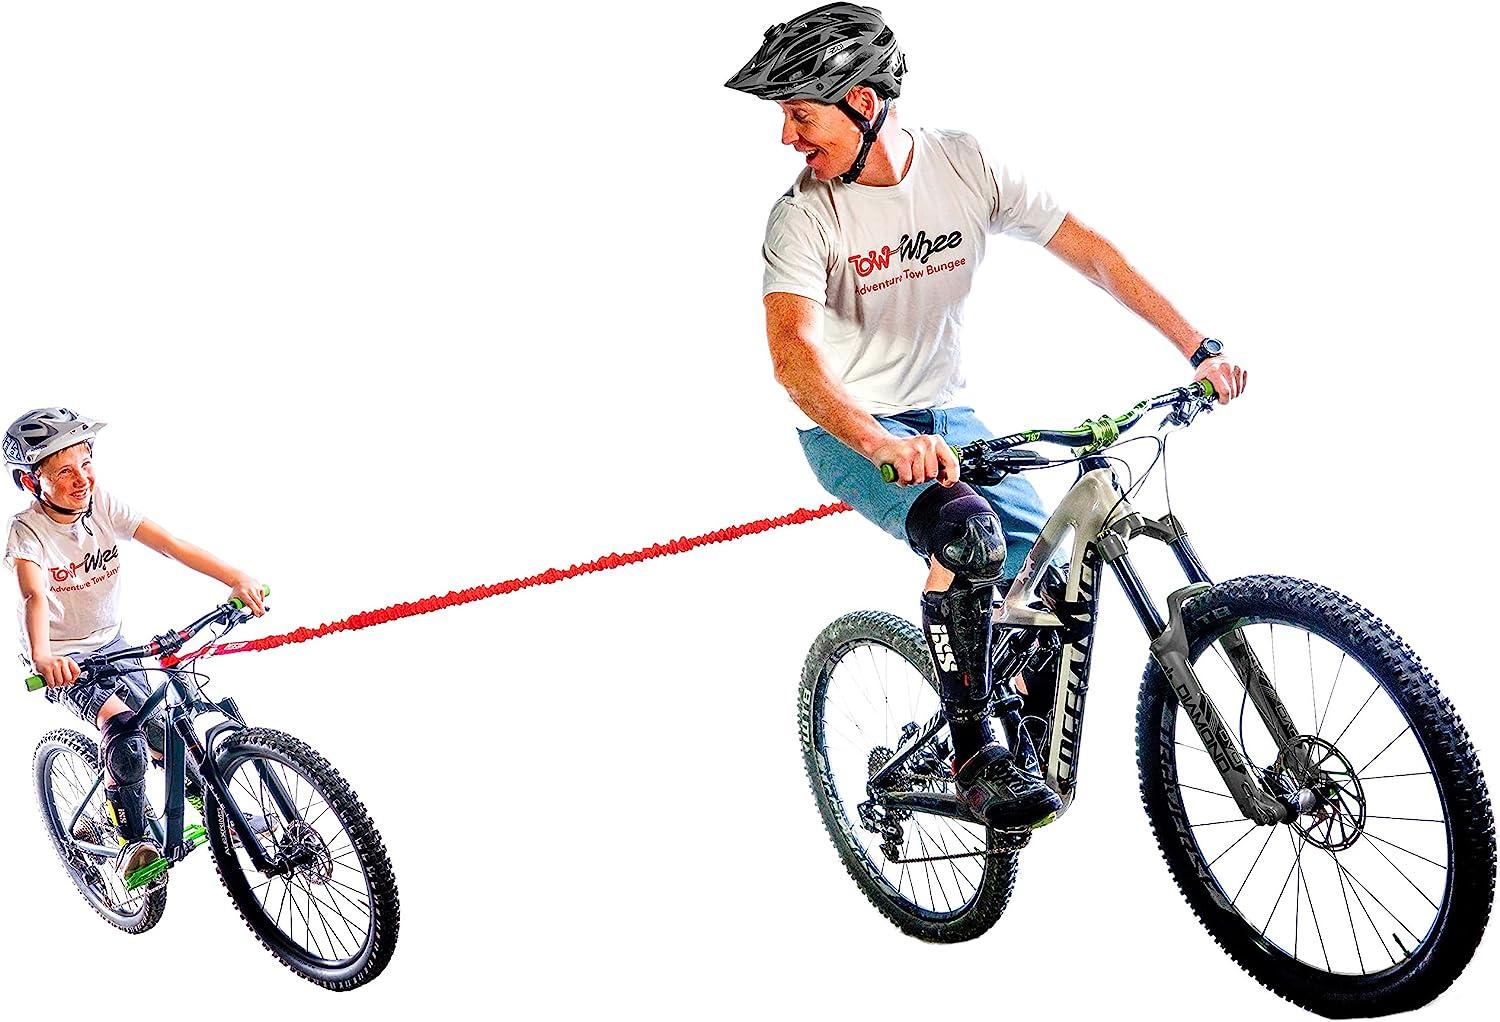  Generic Bicycle Traction Rope, Original Bike Bungee Tow Rope  for Kids, Cycling Stretch Pull Strap for Riding Further with Your Child,  Easy to Use, Compatible with All Mountain Bikes, Military